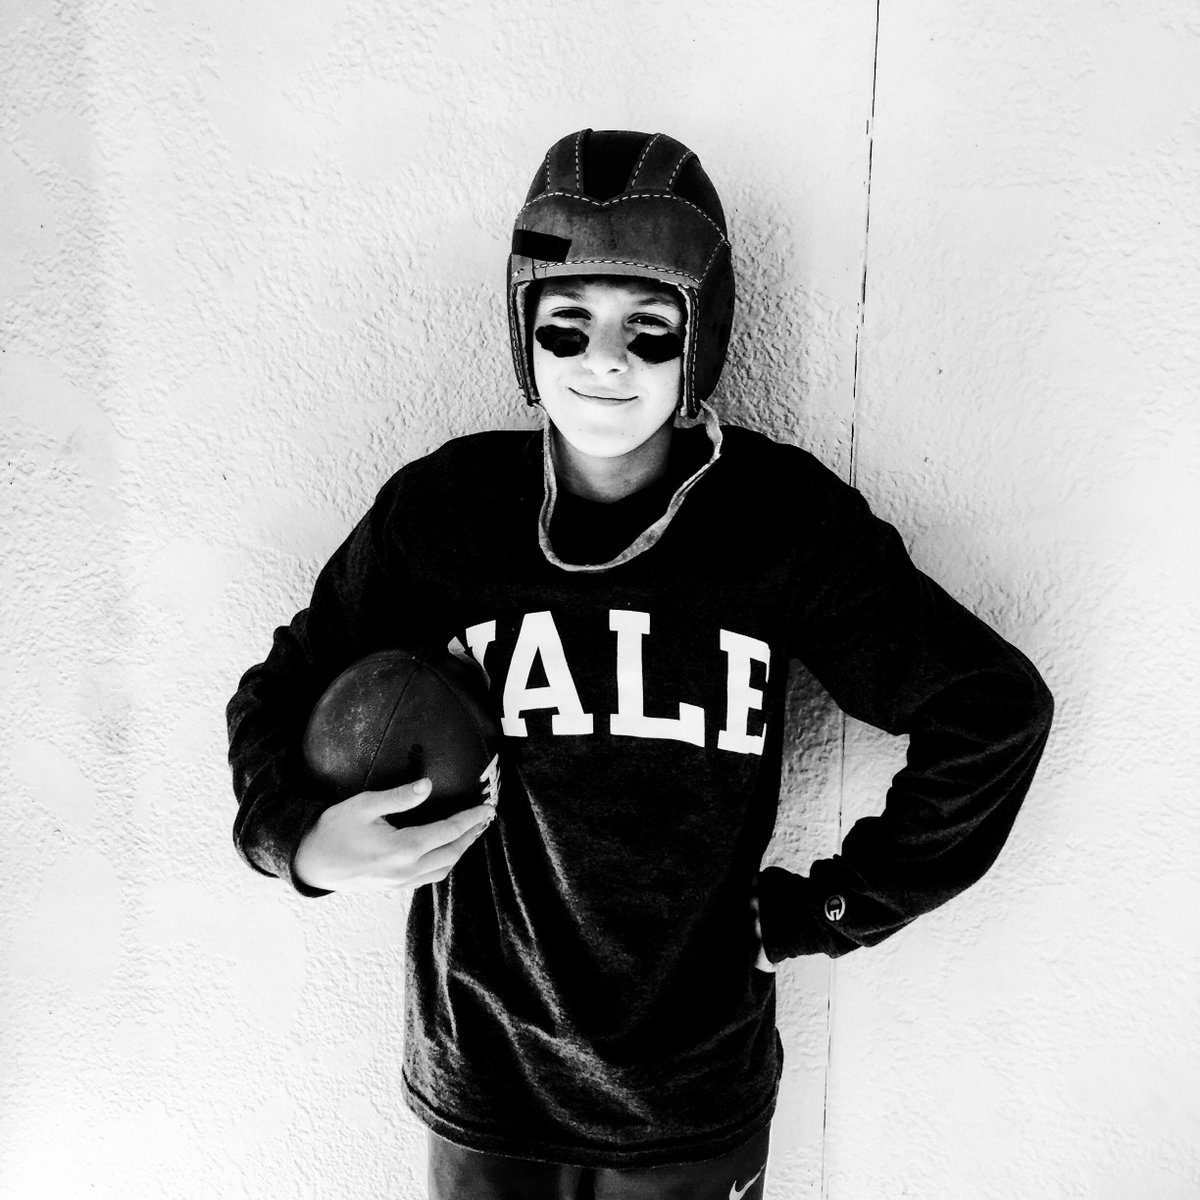 Came across this and thought I would share it. Luca last Halloween. #yalefootball #yale #yale2024